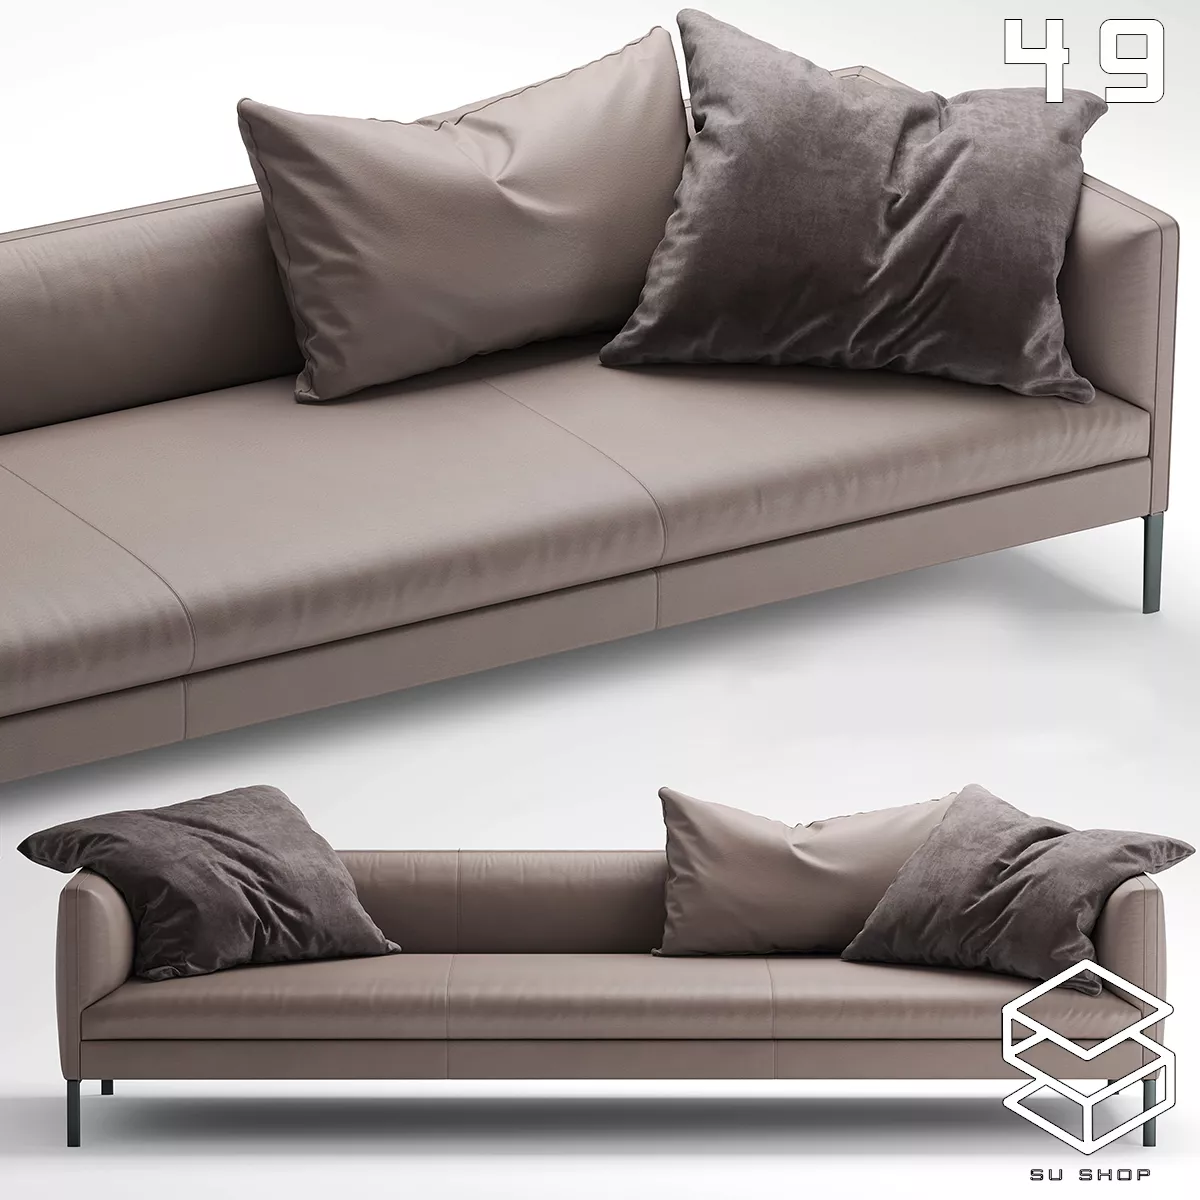 MODERN SOFA - SKETCHUP 3D MODEL - VRAY OR ENSCAPE - ID13673